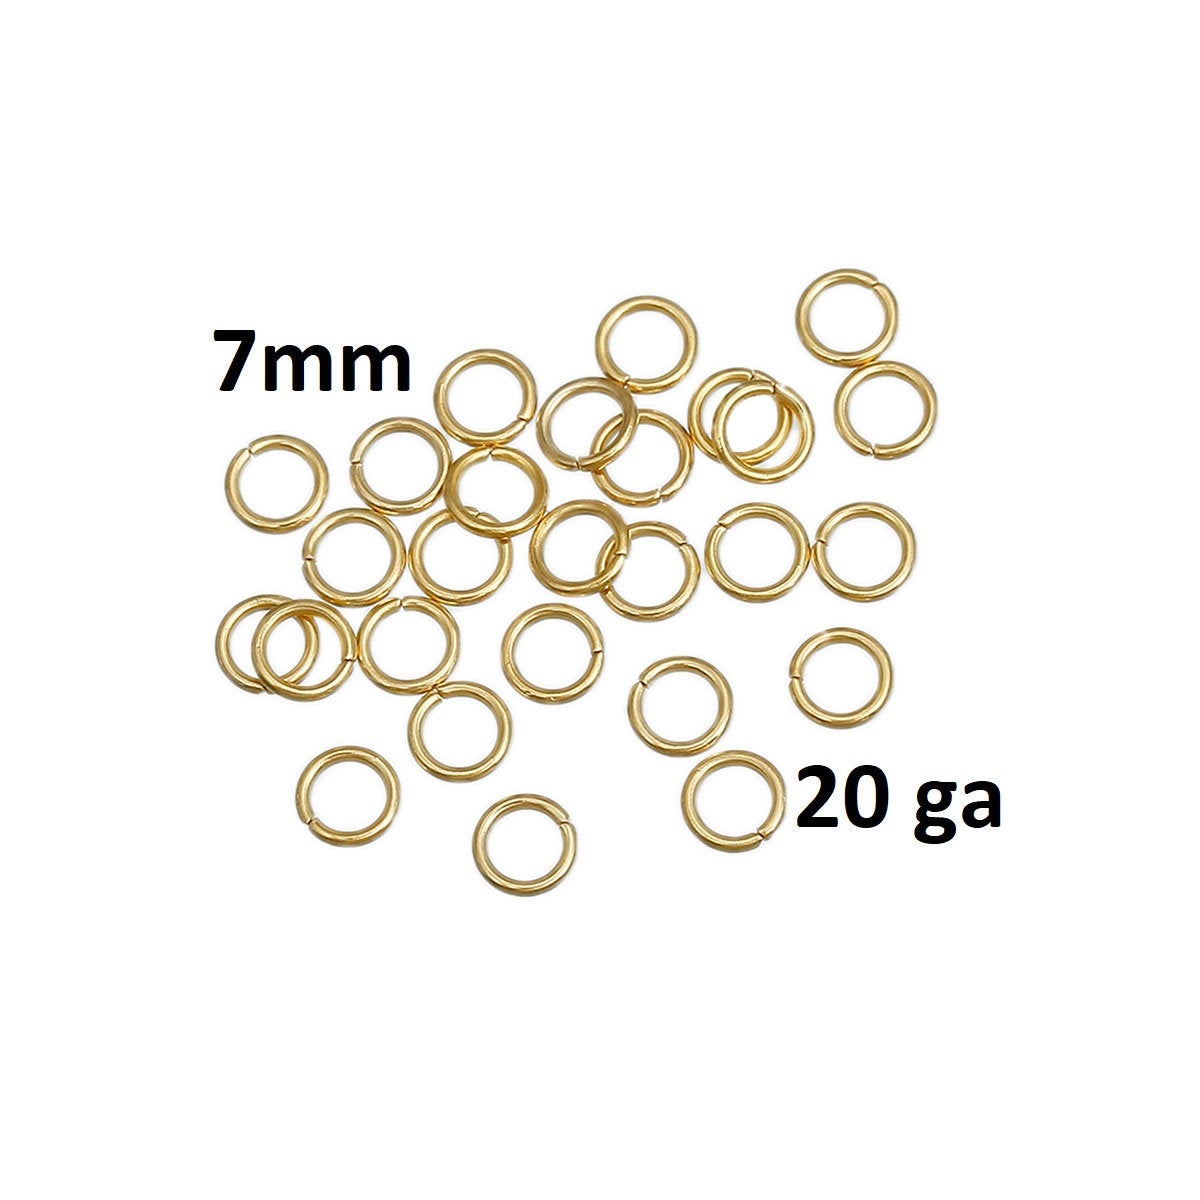 7mm Silver Tone Jump Rings 20 Gauge Stainless Steel 100pcs 7mm X 0.8mm 